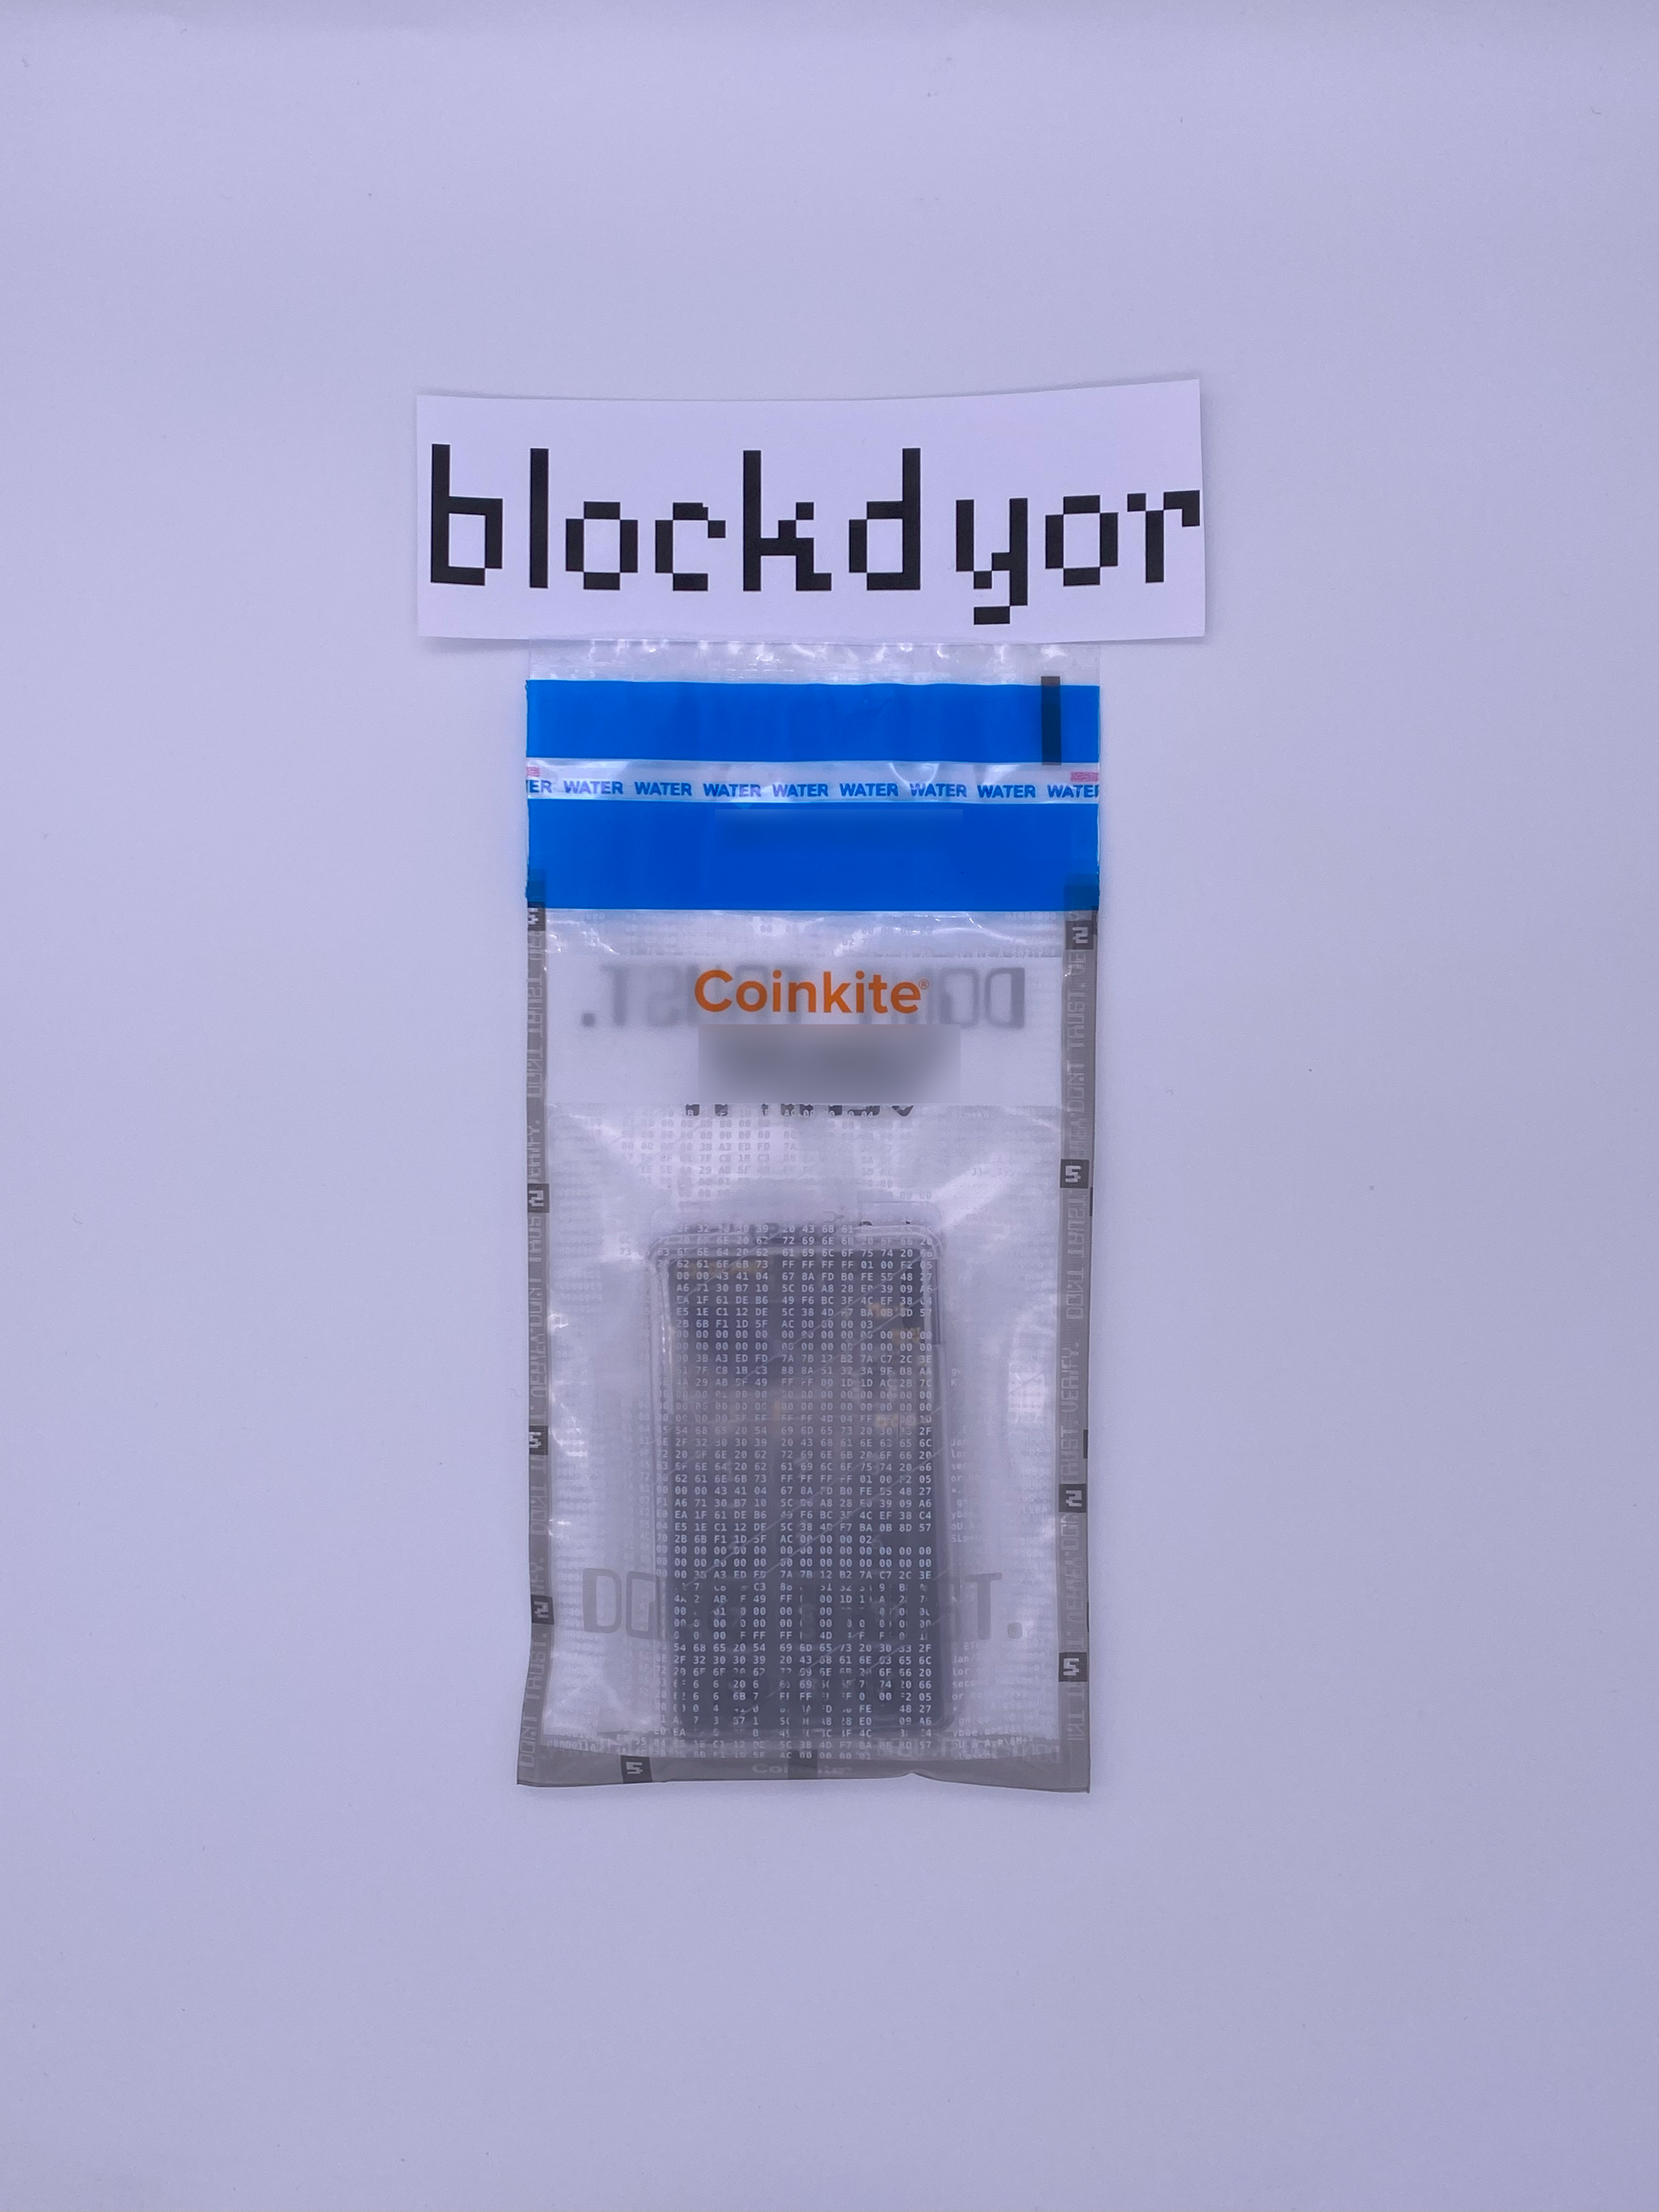 COLDCARD Mk4 Packaging Front (serial no. have been blurred)